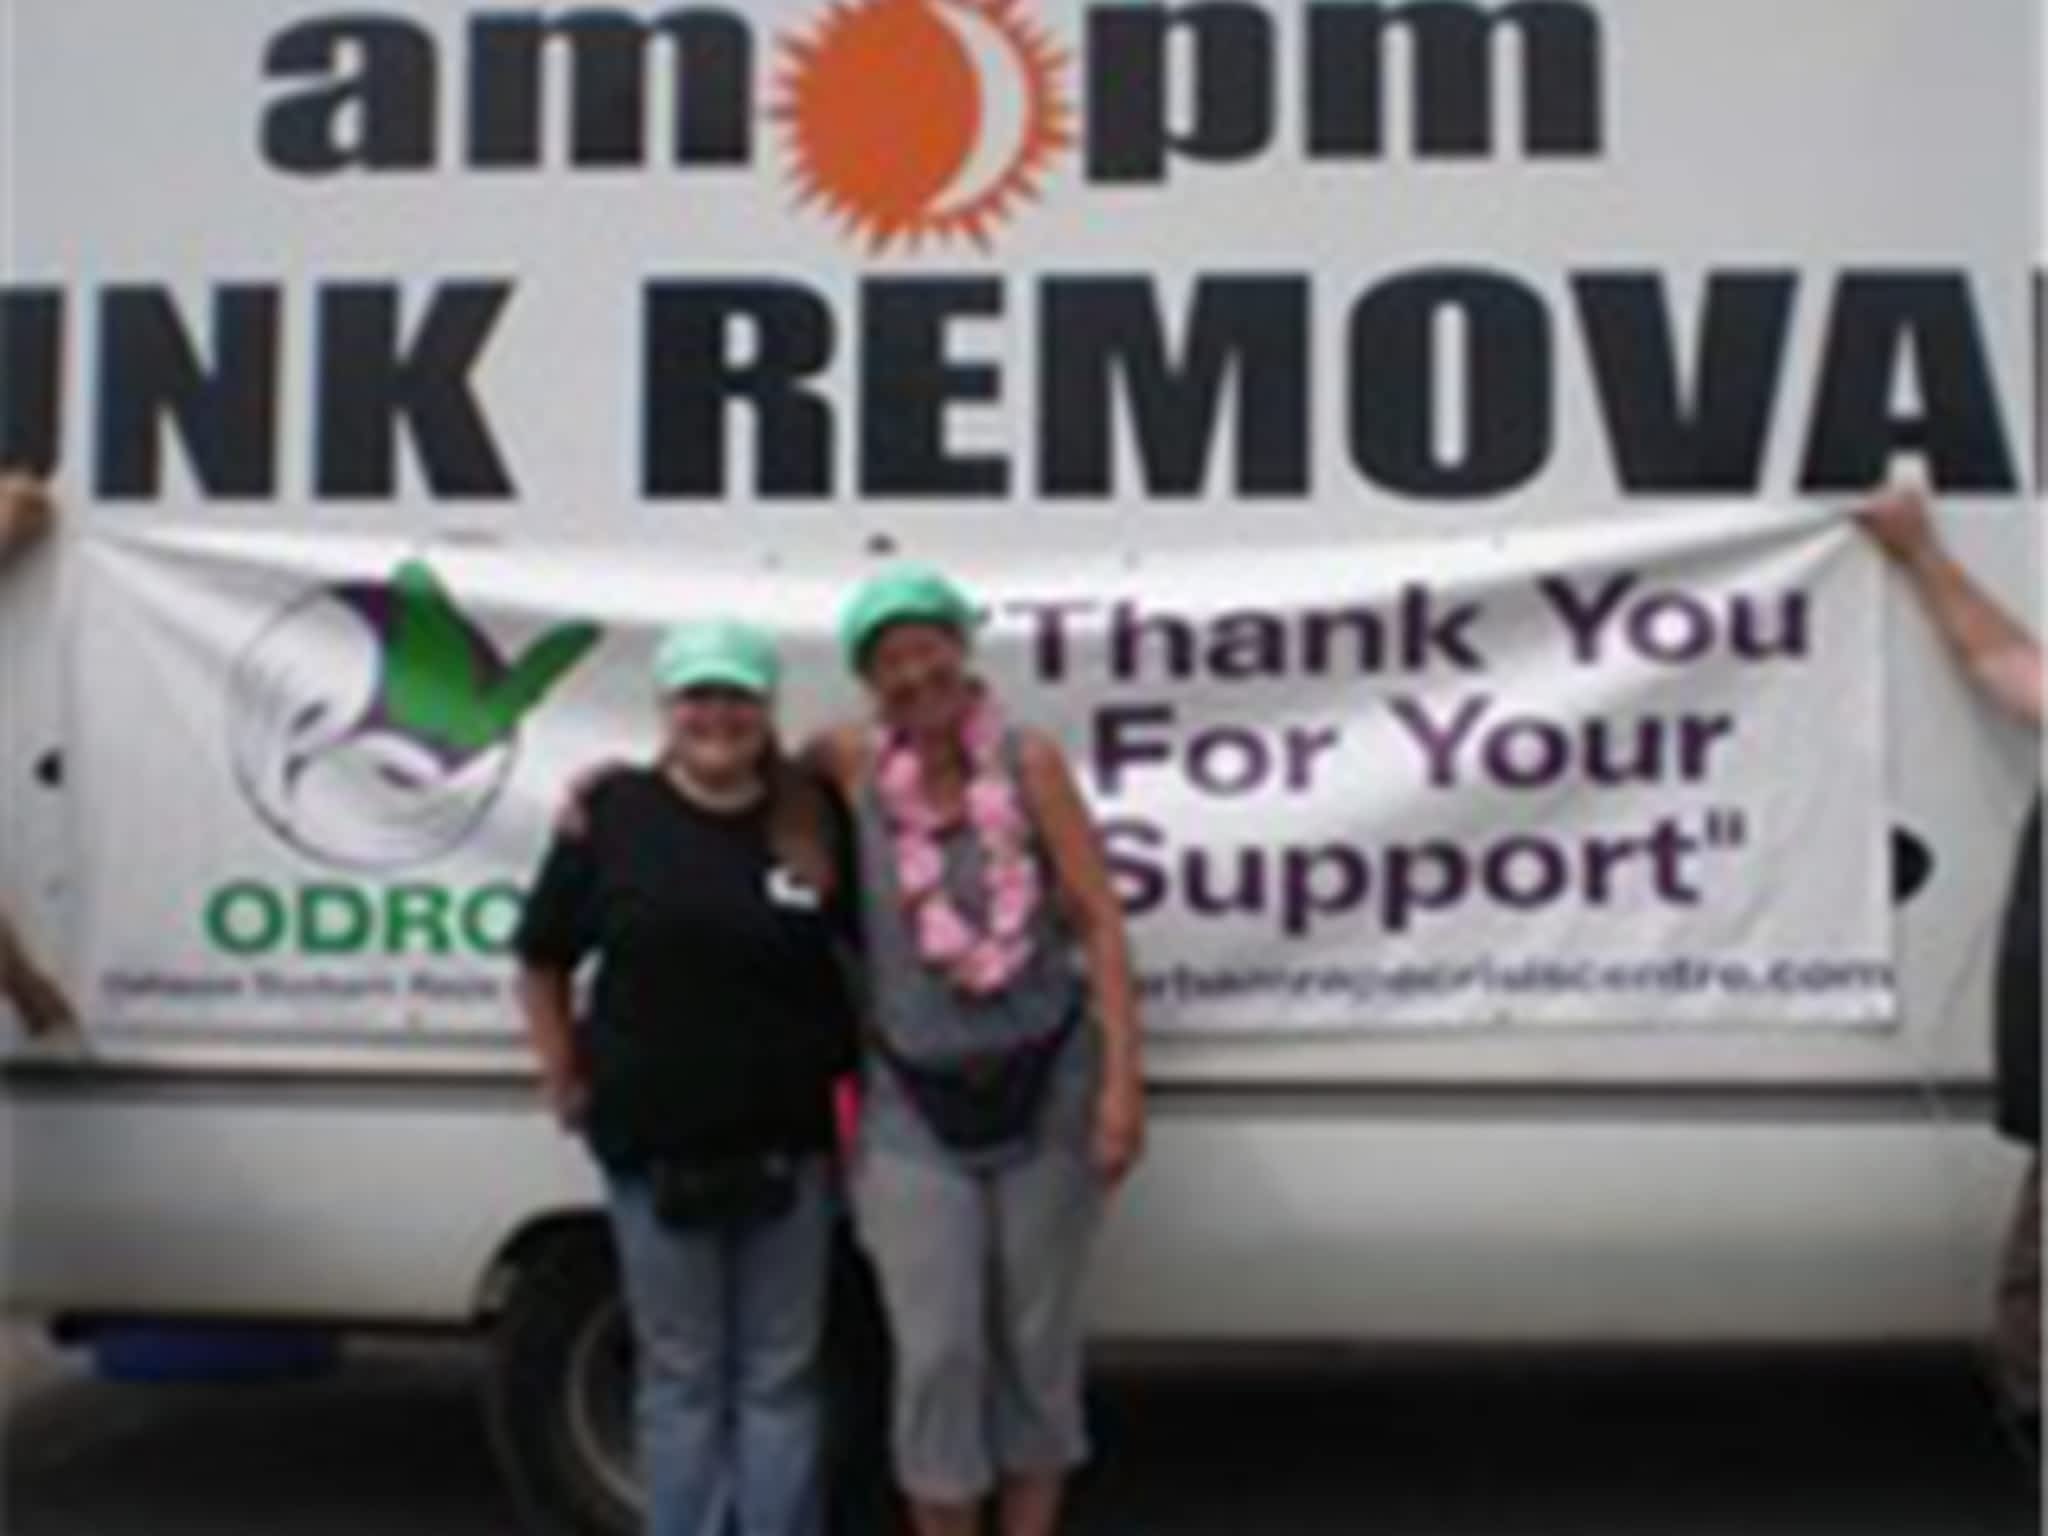 photo AM PM Junk Removal